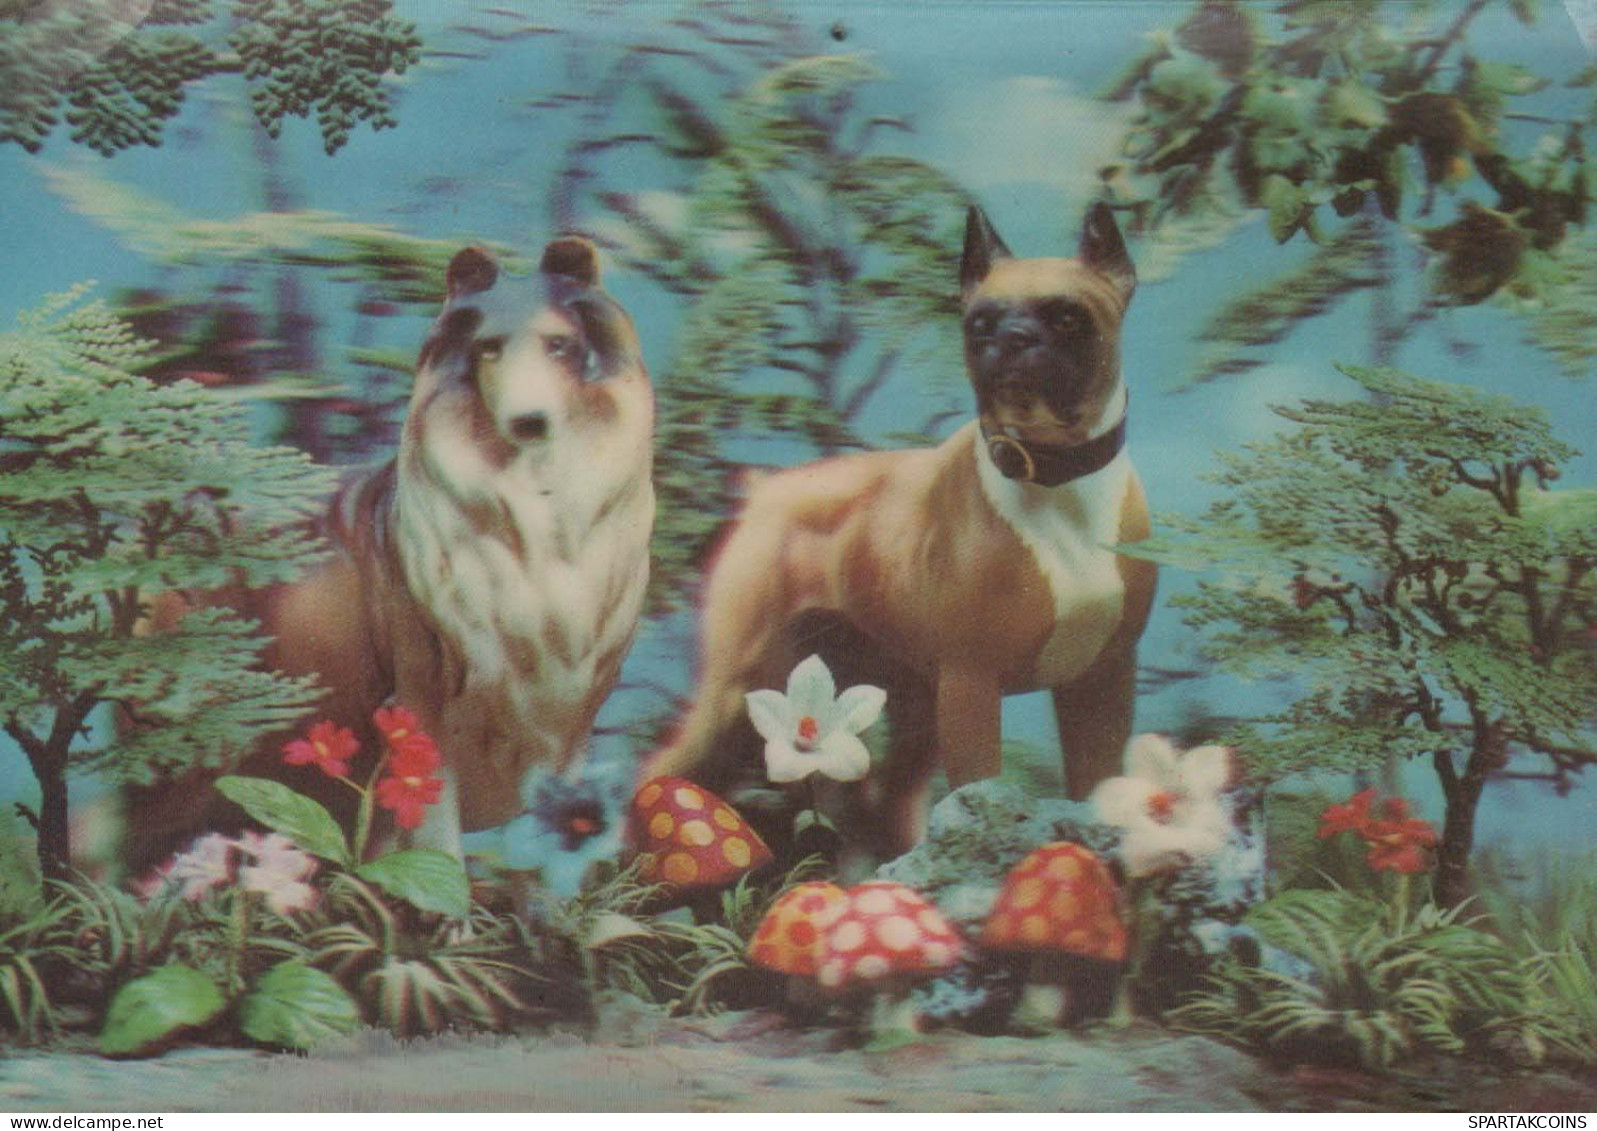 CANE Animale LENTICULAR 3D Vintage Cartolina CPSM #PAZ192.A - Dogs